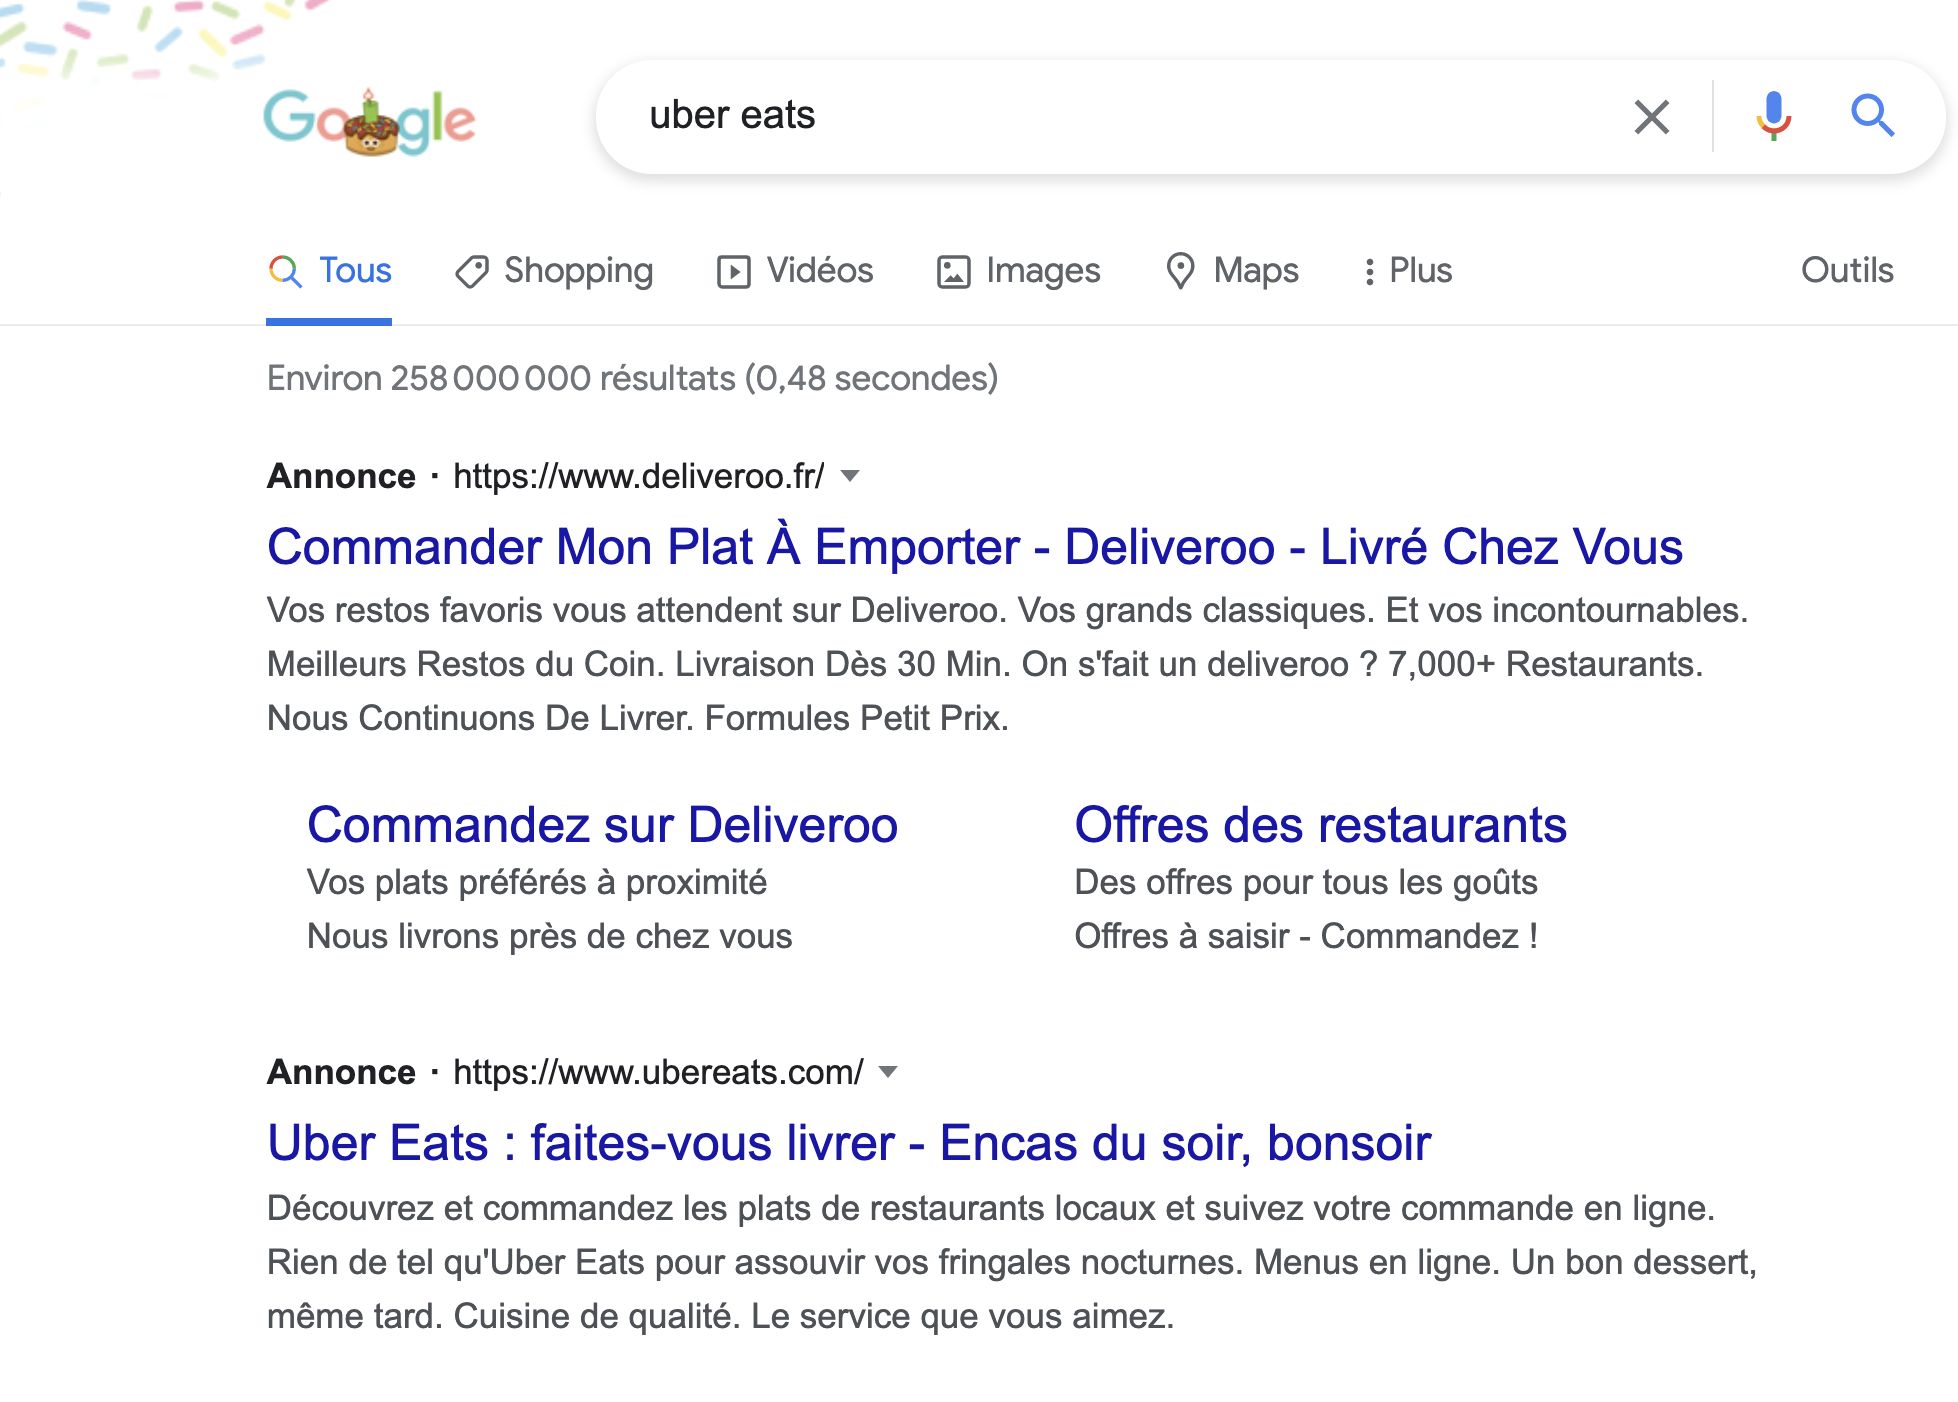 Paid search - Uber Eats